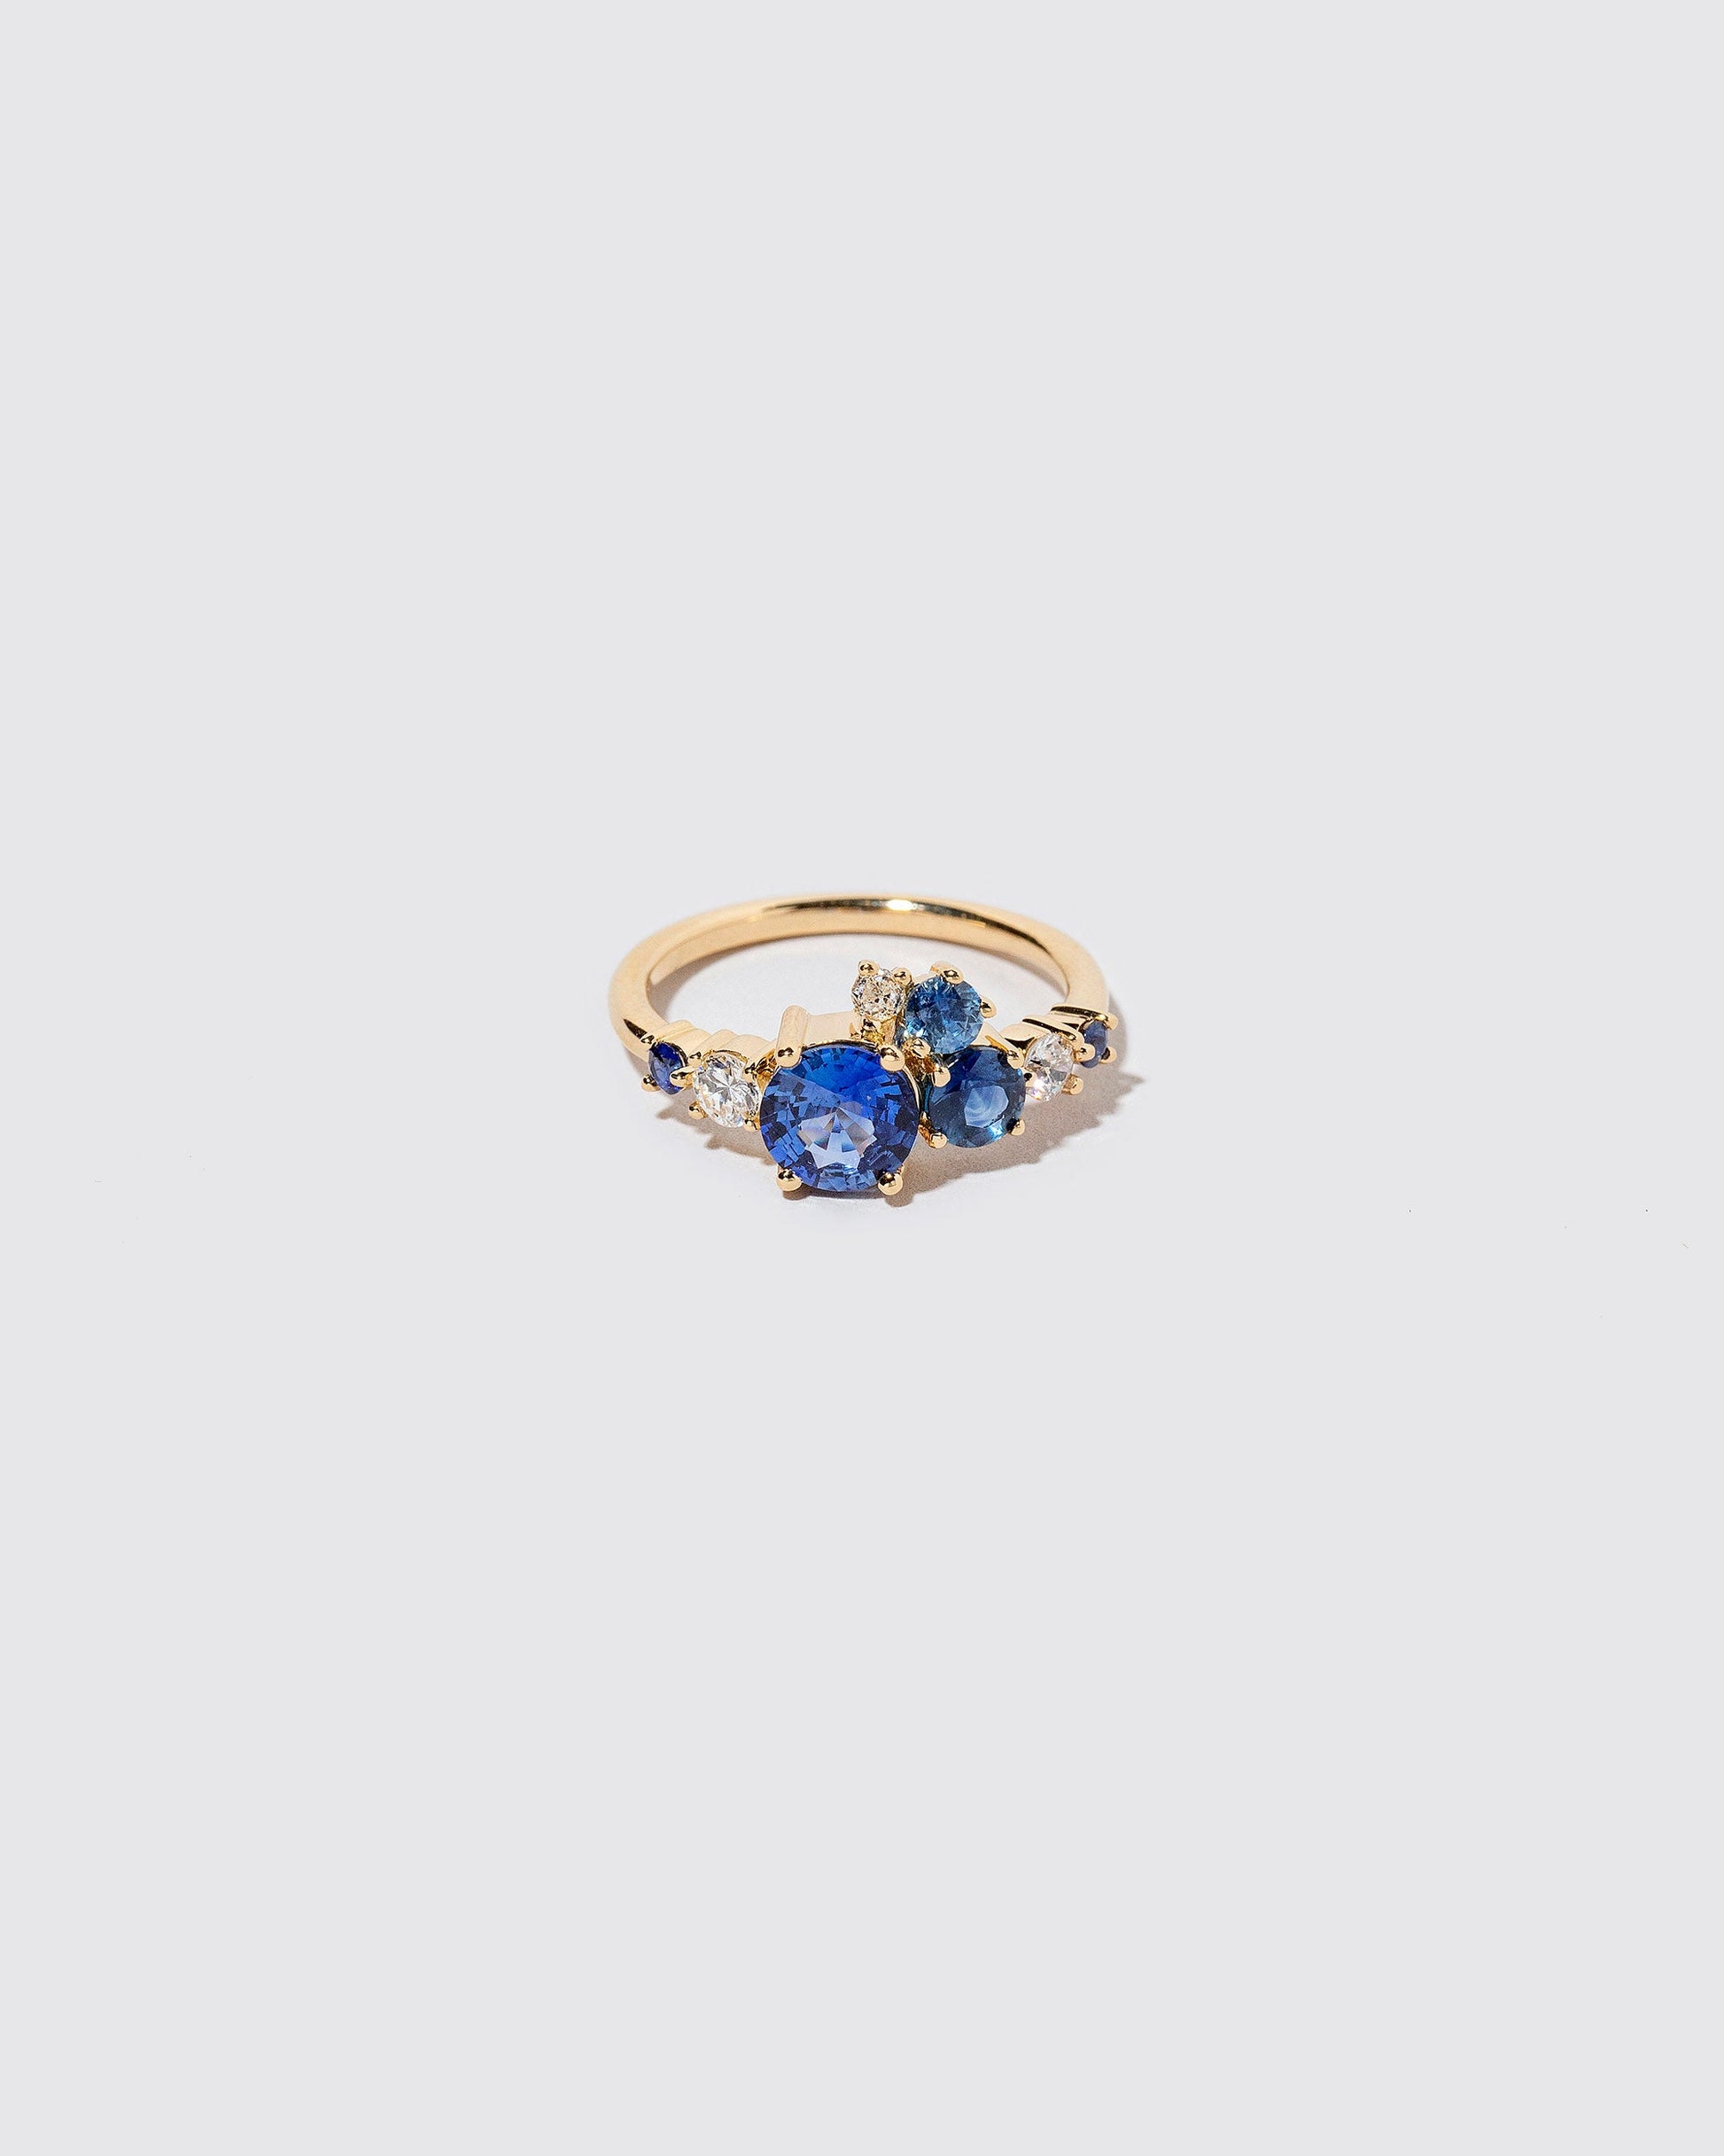 Limited-edition blue sapphire and white diamond Luna Ring on light color background.